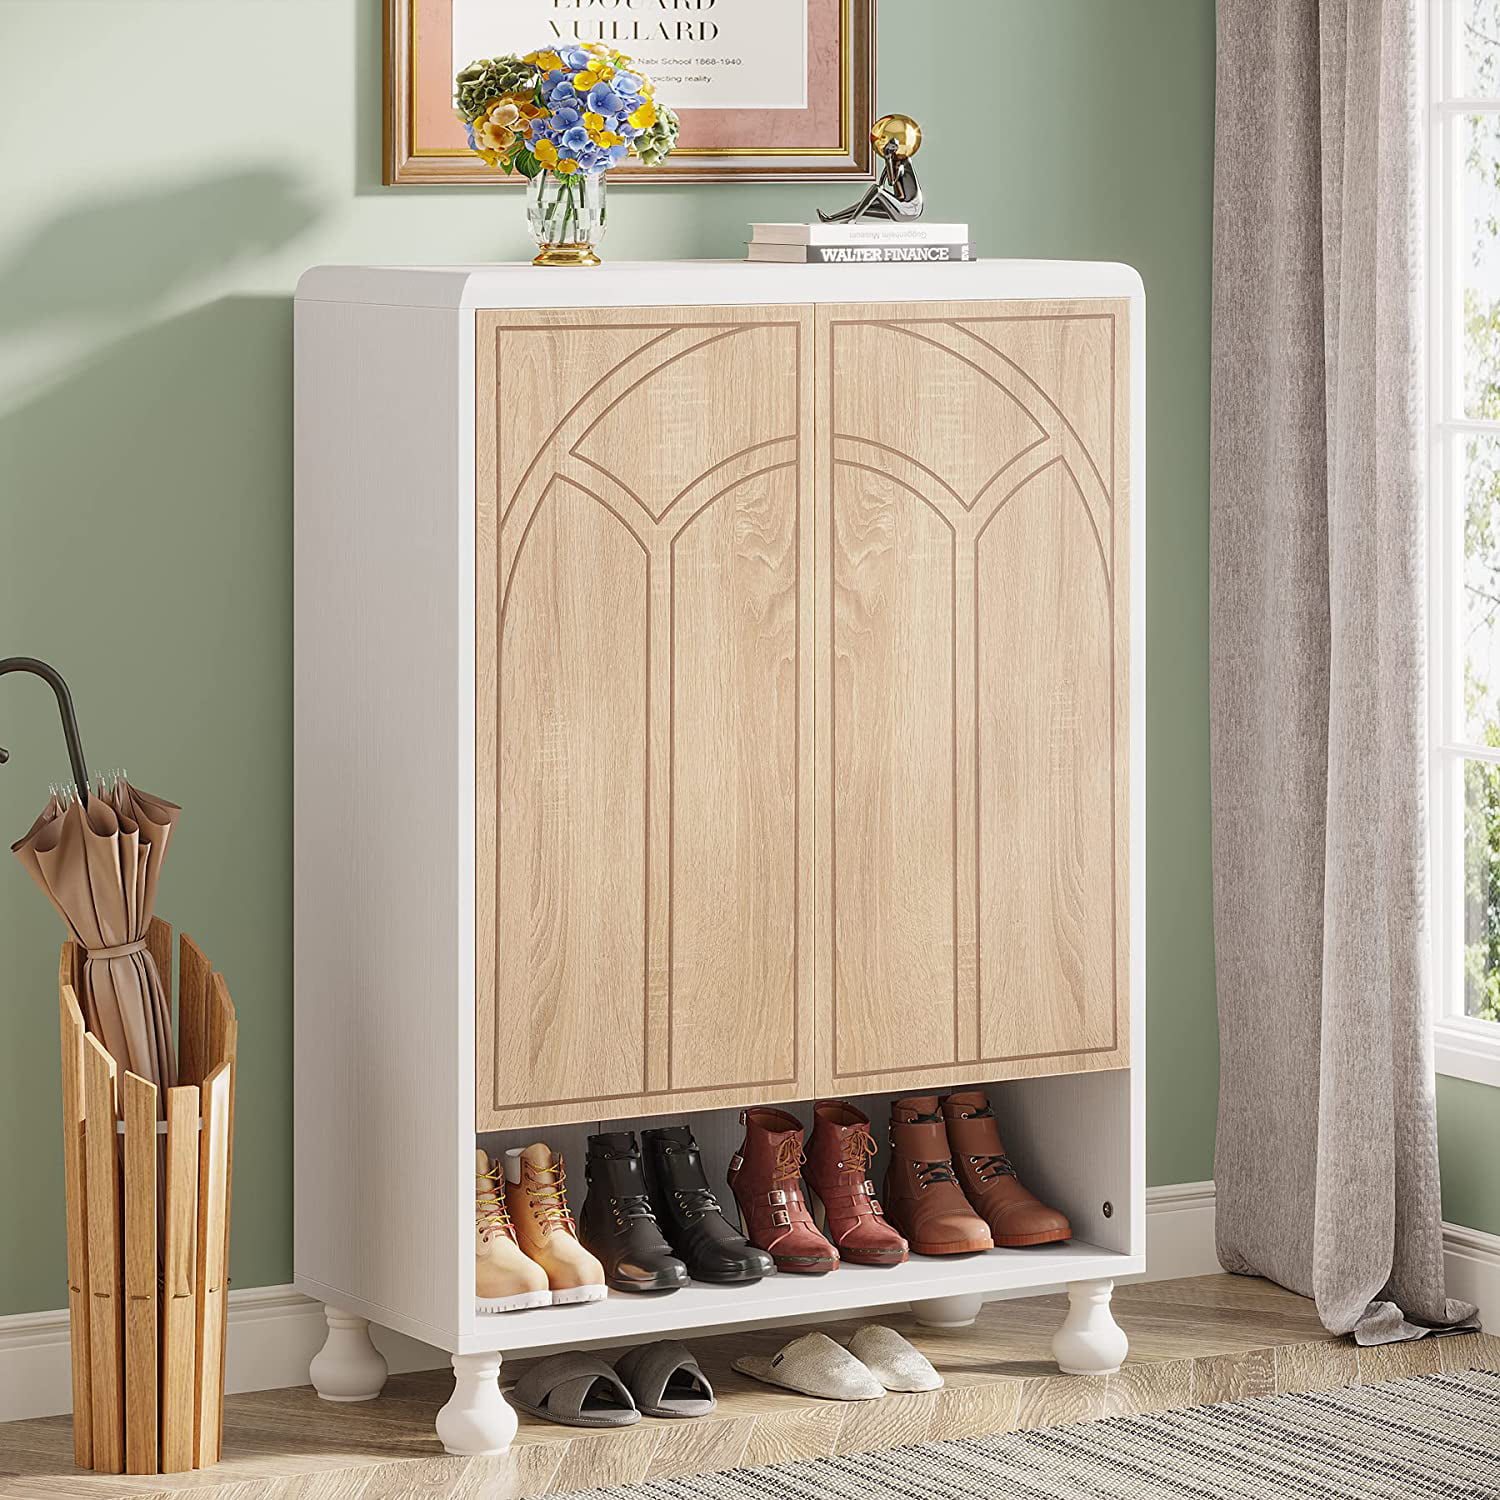 SimplyNeu 14 in. W D x 25.375 in. W x 84 in. H Seashore Grey Shoe Storage  Tower Wood Closet System SNT4-CG - The Home Depot